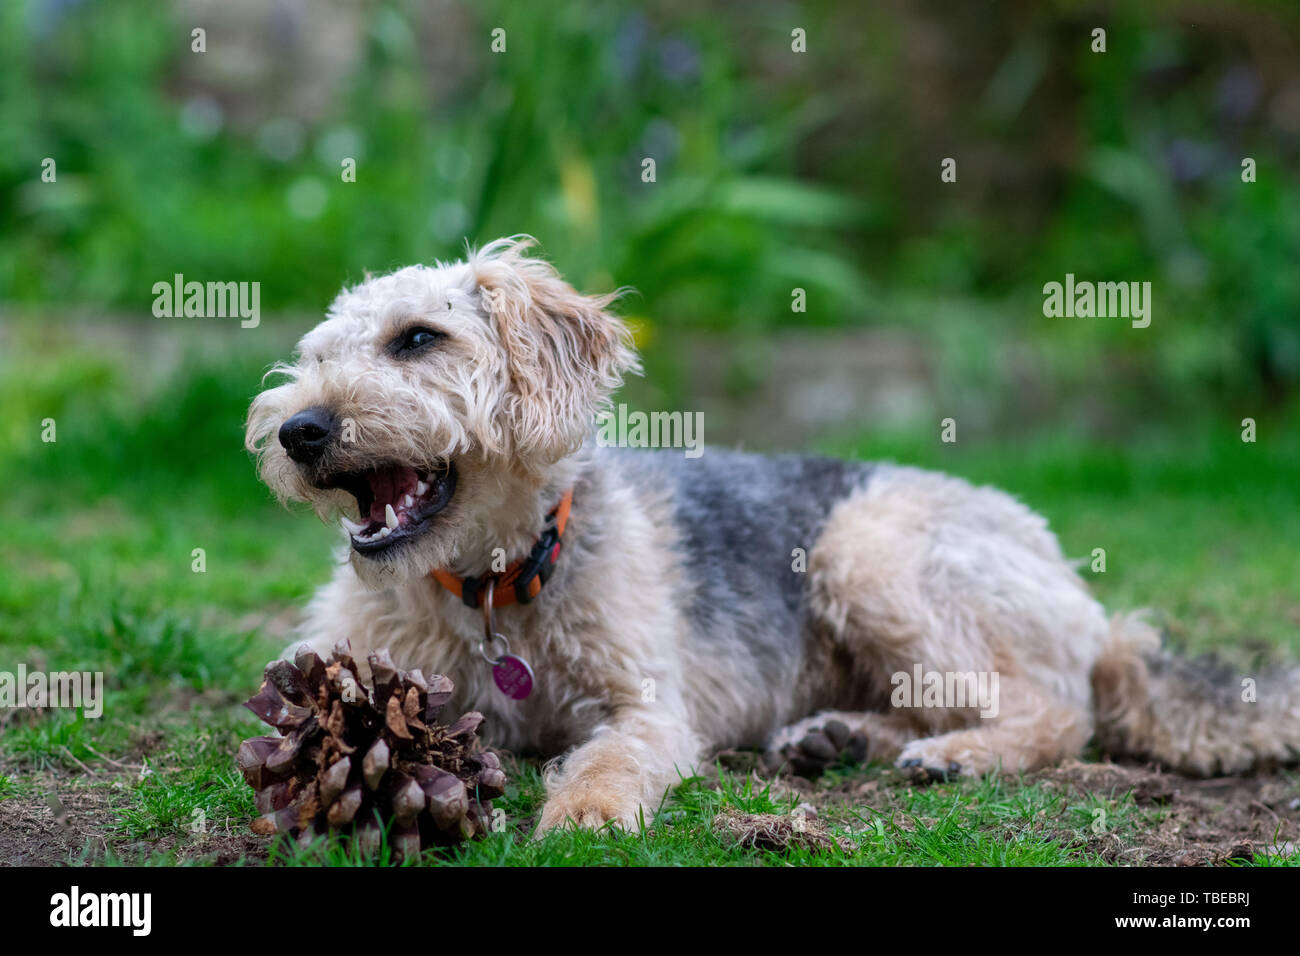 Dog on grass, chewing. Stock Photo